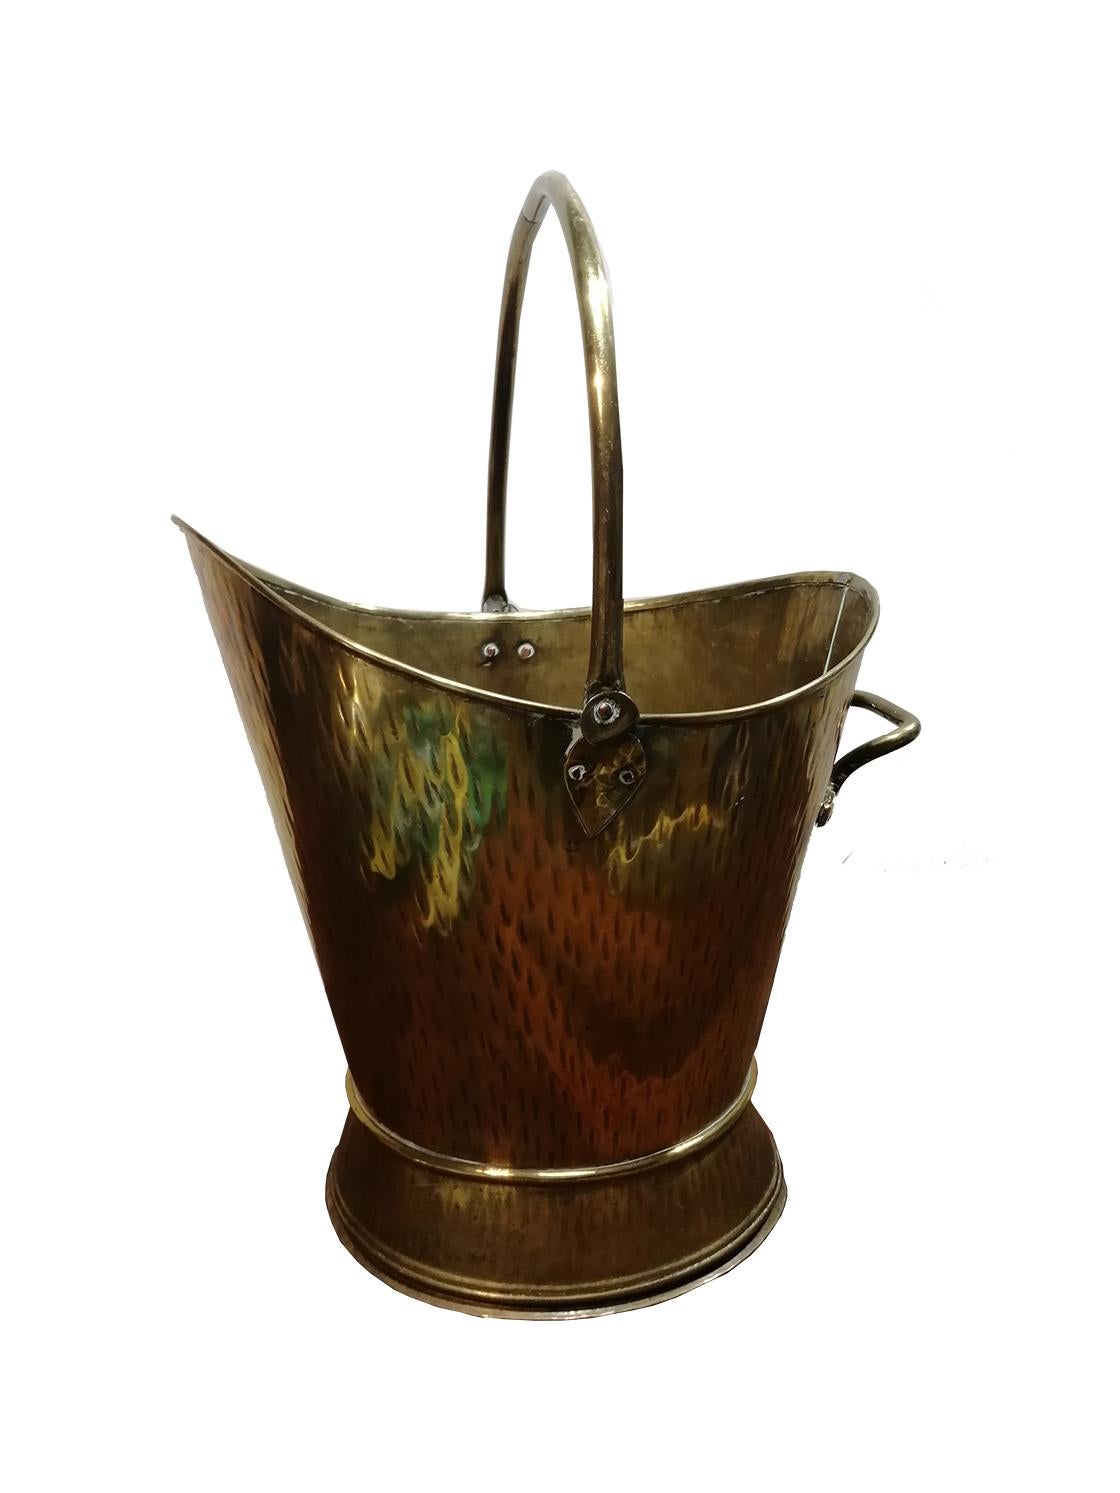 Good quality brass coal cube, scuttle, for your fireplace.

Late 19th century or early 20th century

With top and side handle.
 